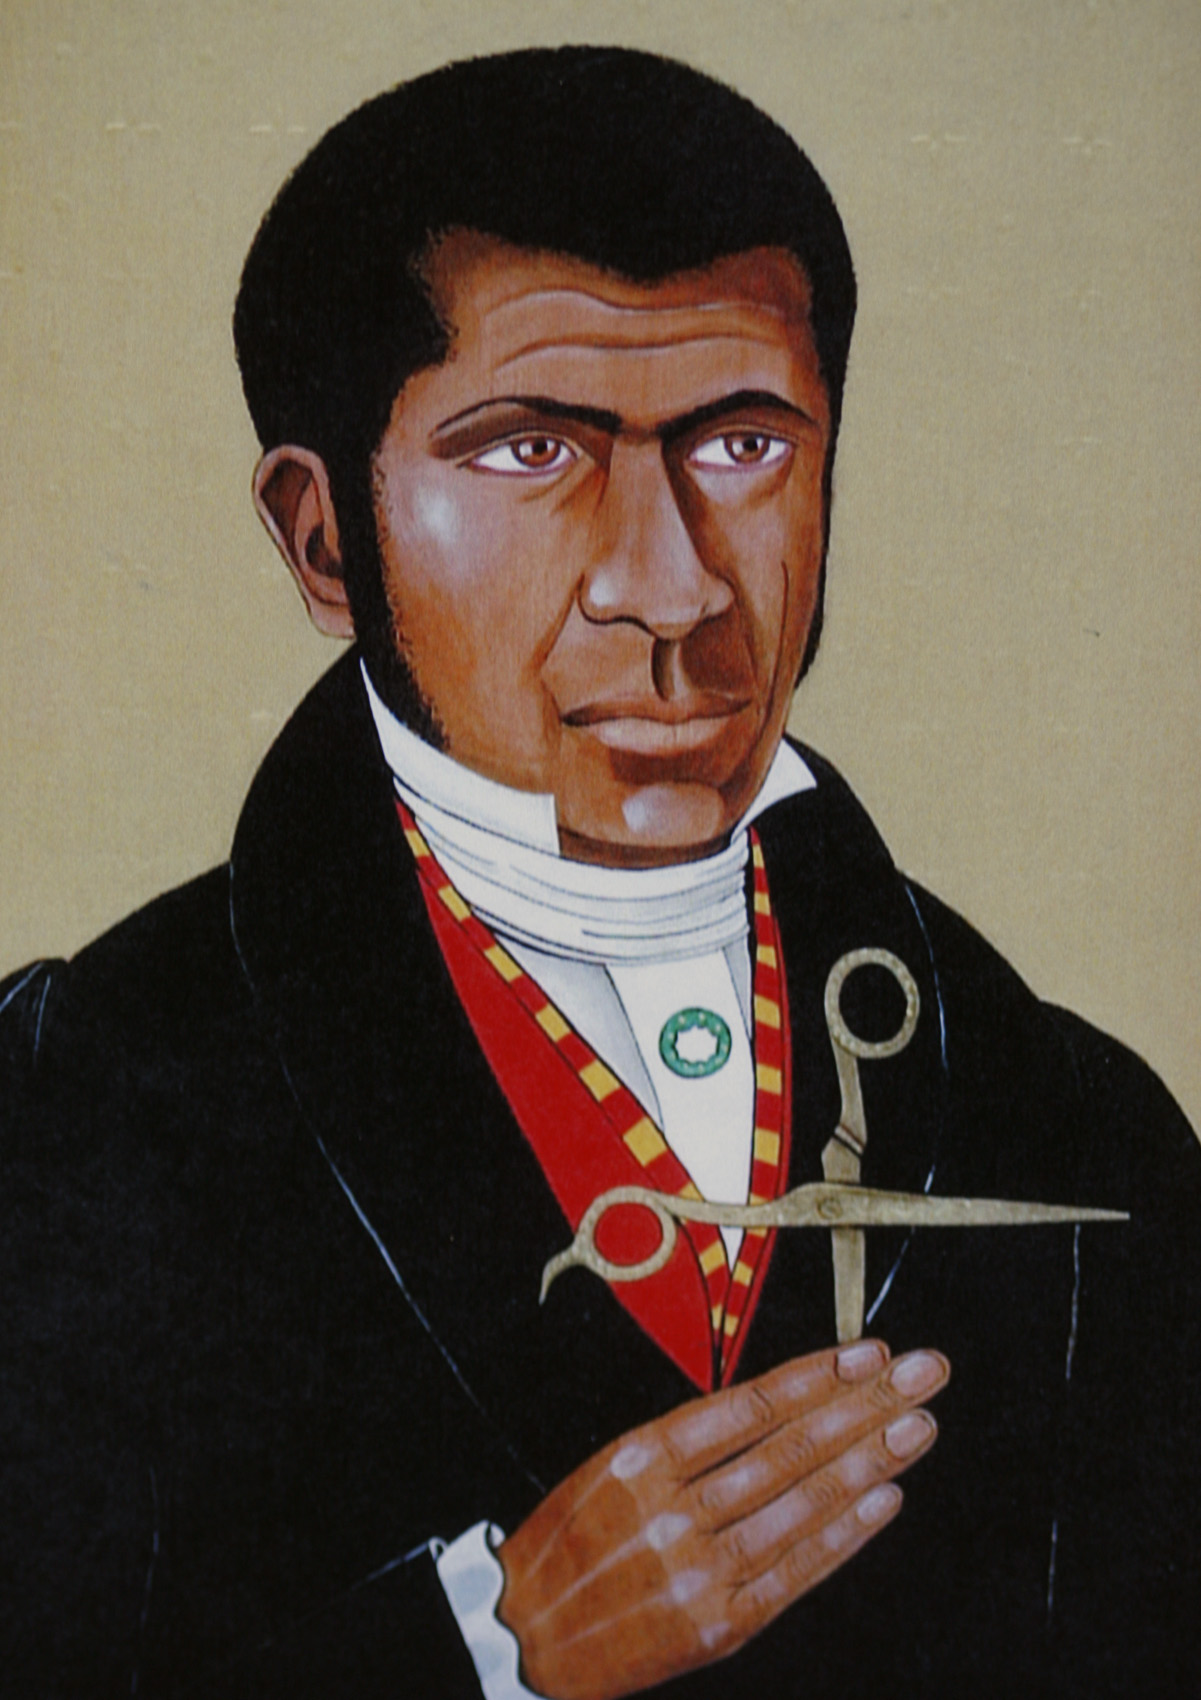  Painting of Pierre Toussiant holding golden scissors in shape of cross (CNS photo/courtesy Christina Miller) (March 7, 2008) 